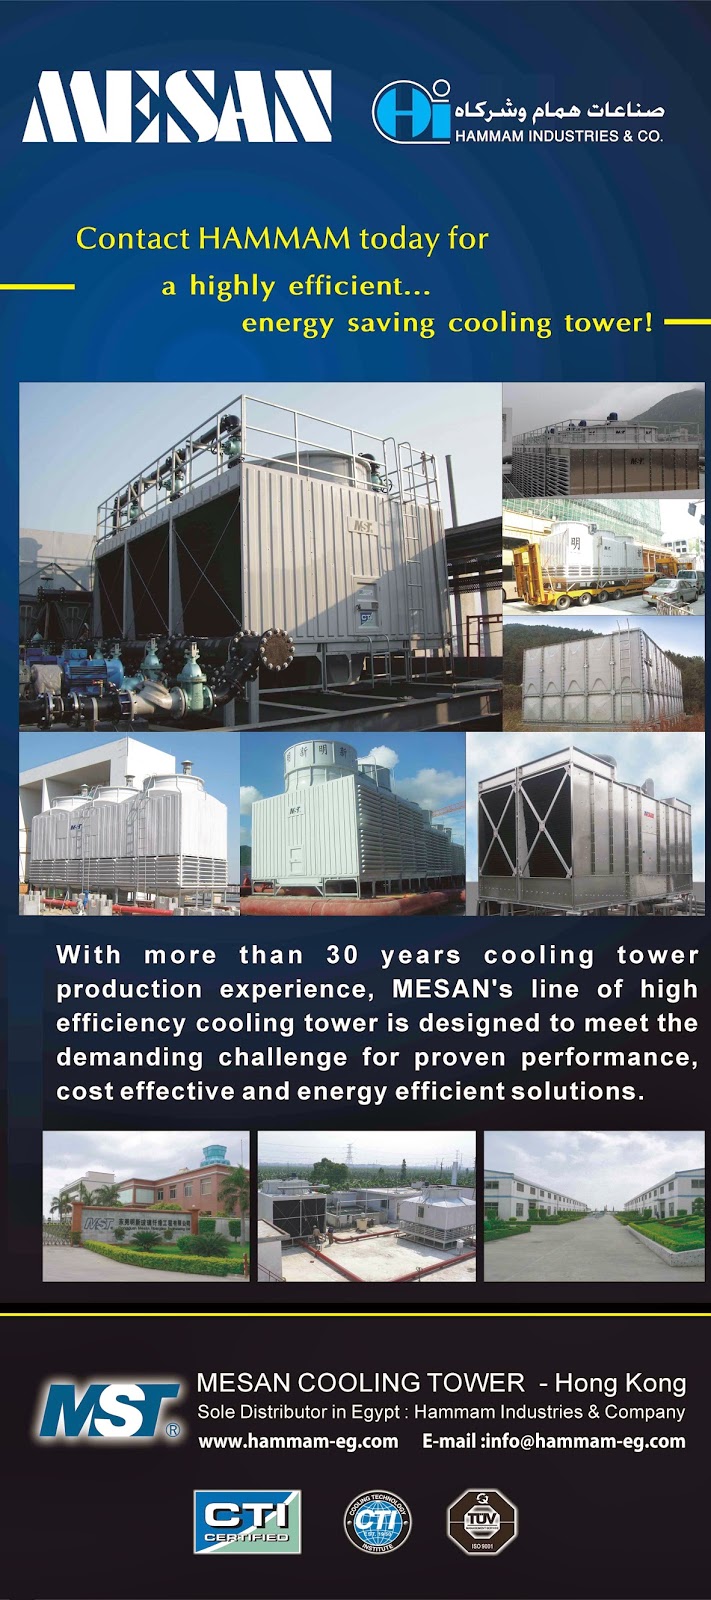  Click Image To View Hammam Industries & Co. CTI Certified Cooling Tower Mesan Product Range.